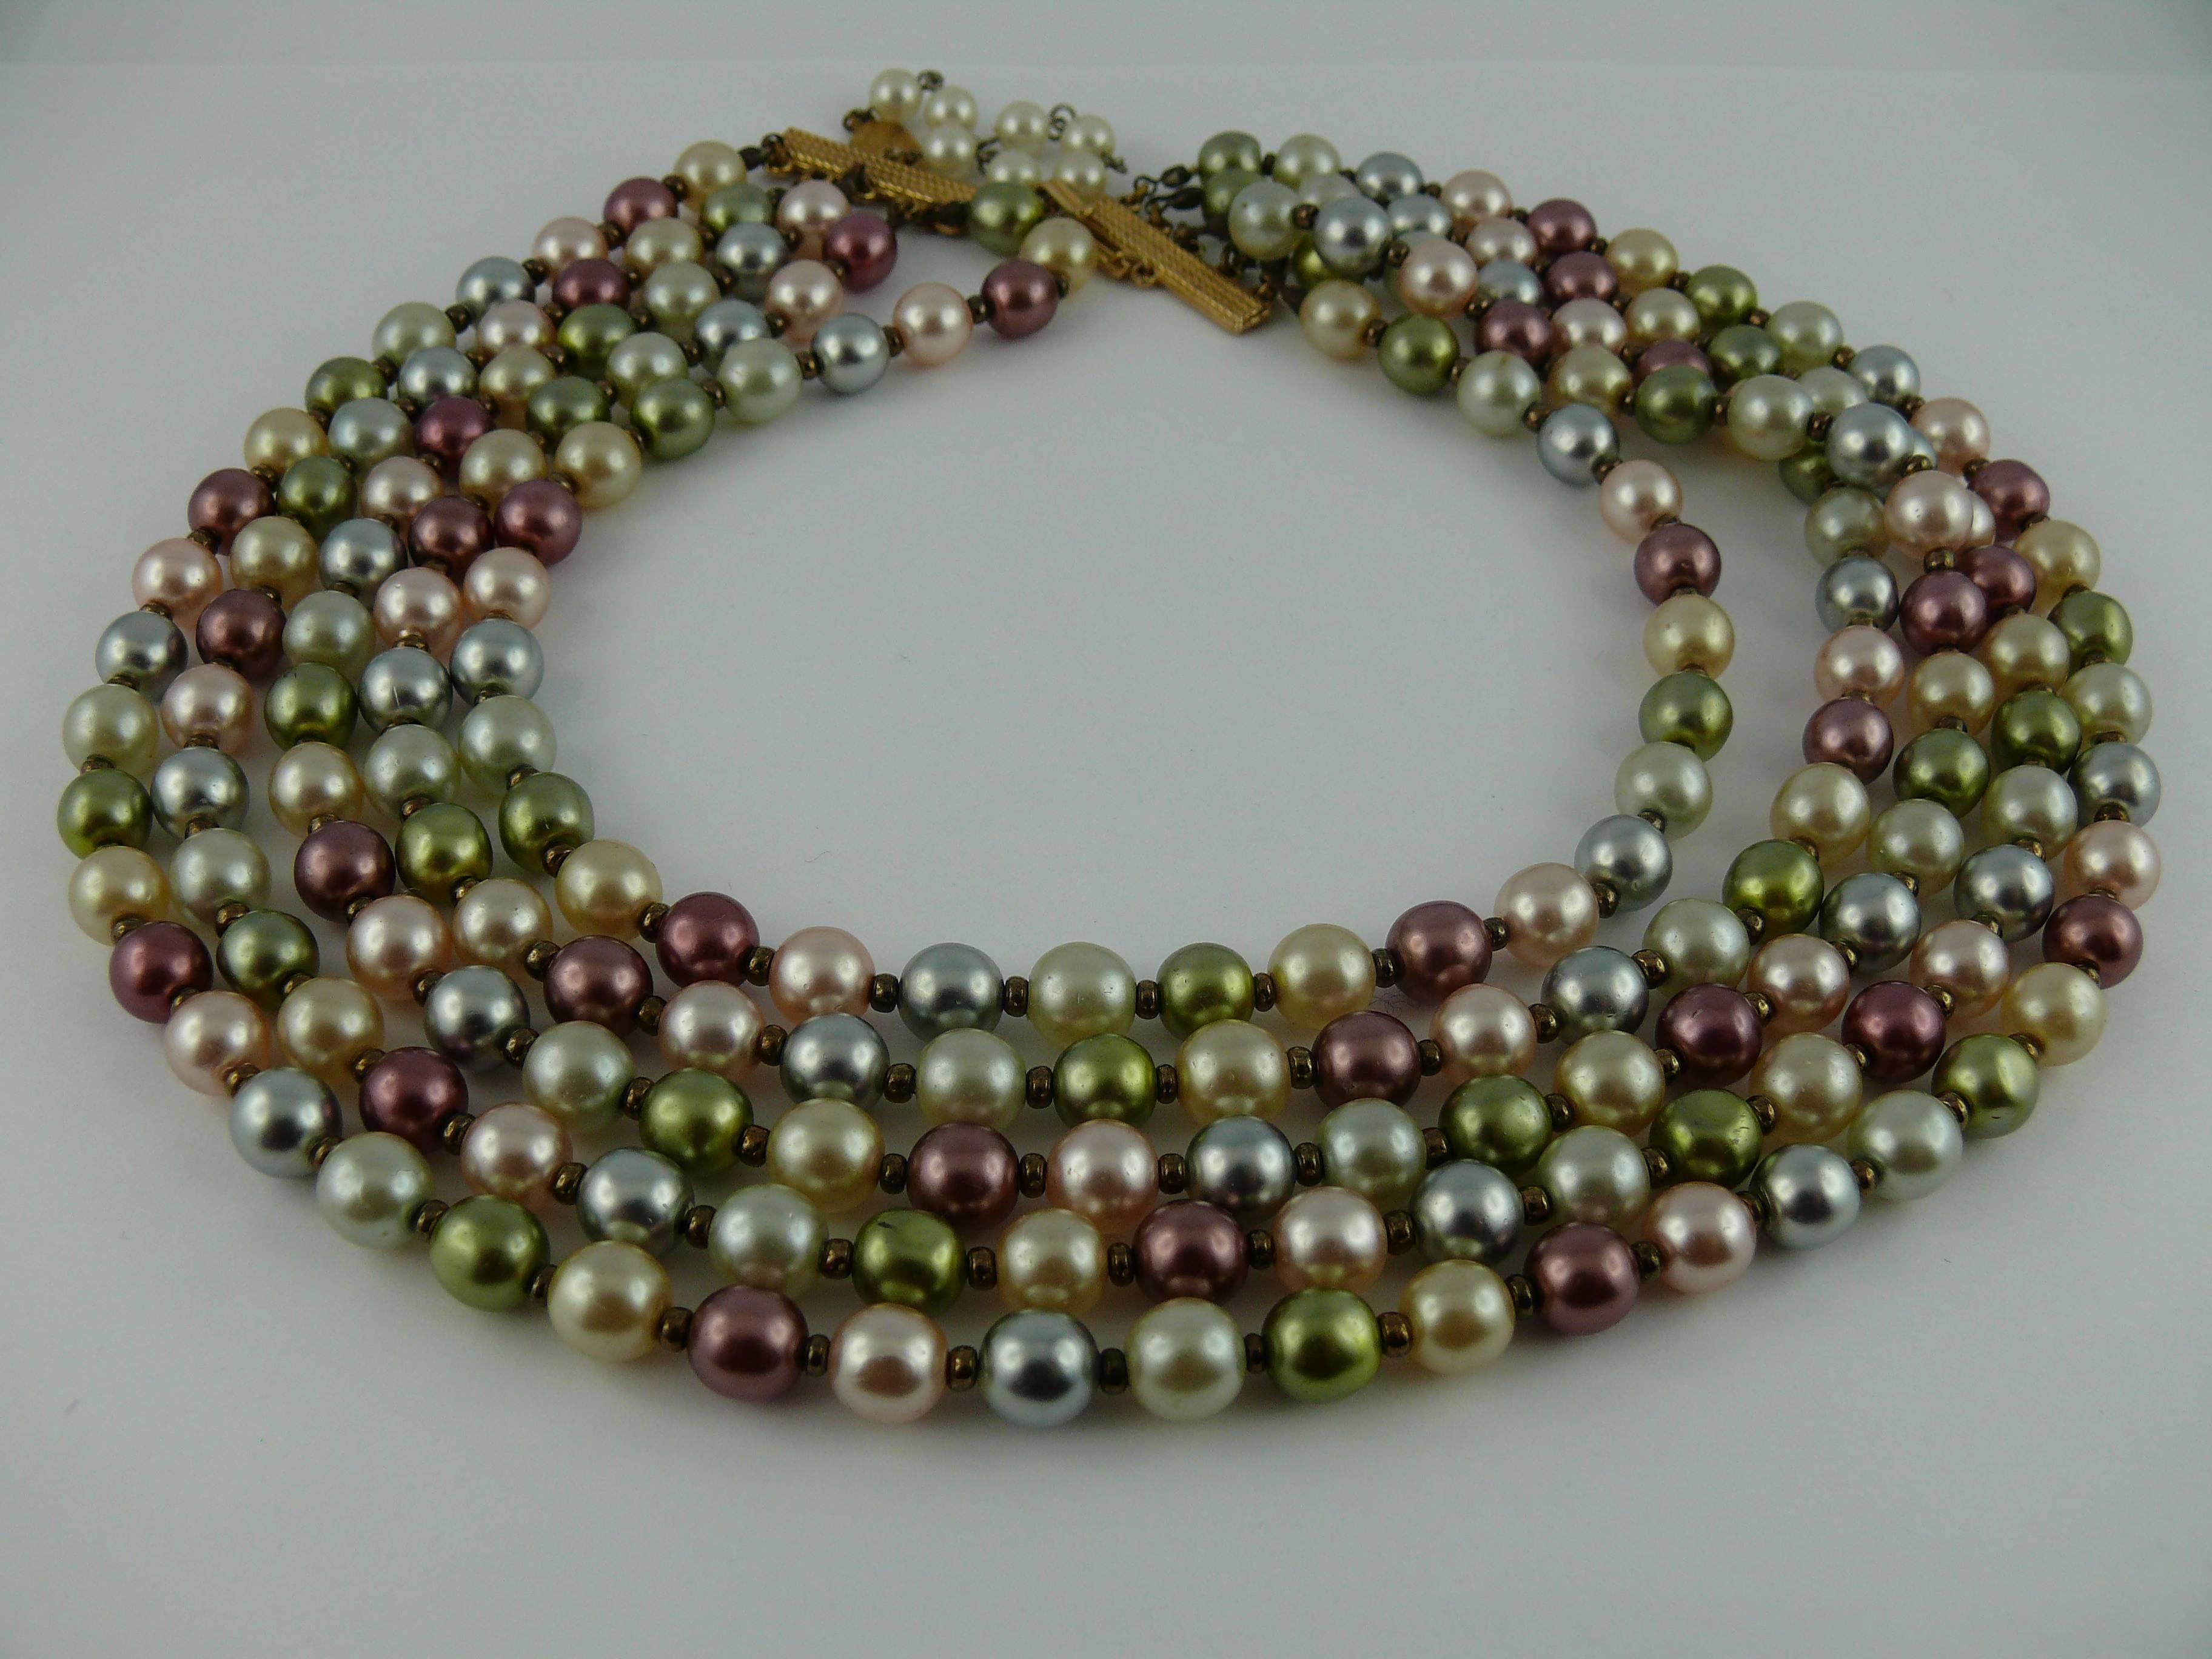 CHRISTIAN DIOR vintage five strand multicolor pearl choker necklace with gold tone hardware.

Hook closure.

Marked CHRISTIAN DIOR.

Indicative measurements : length from approx. 33 cm (12.99 inches) to 39 cm (15.35 inches) / height approx. 6 cm